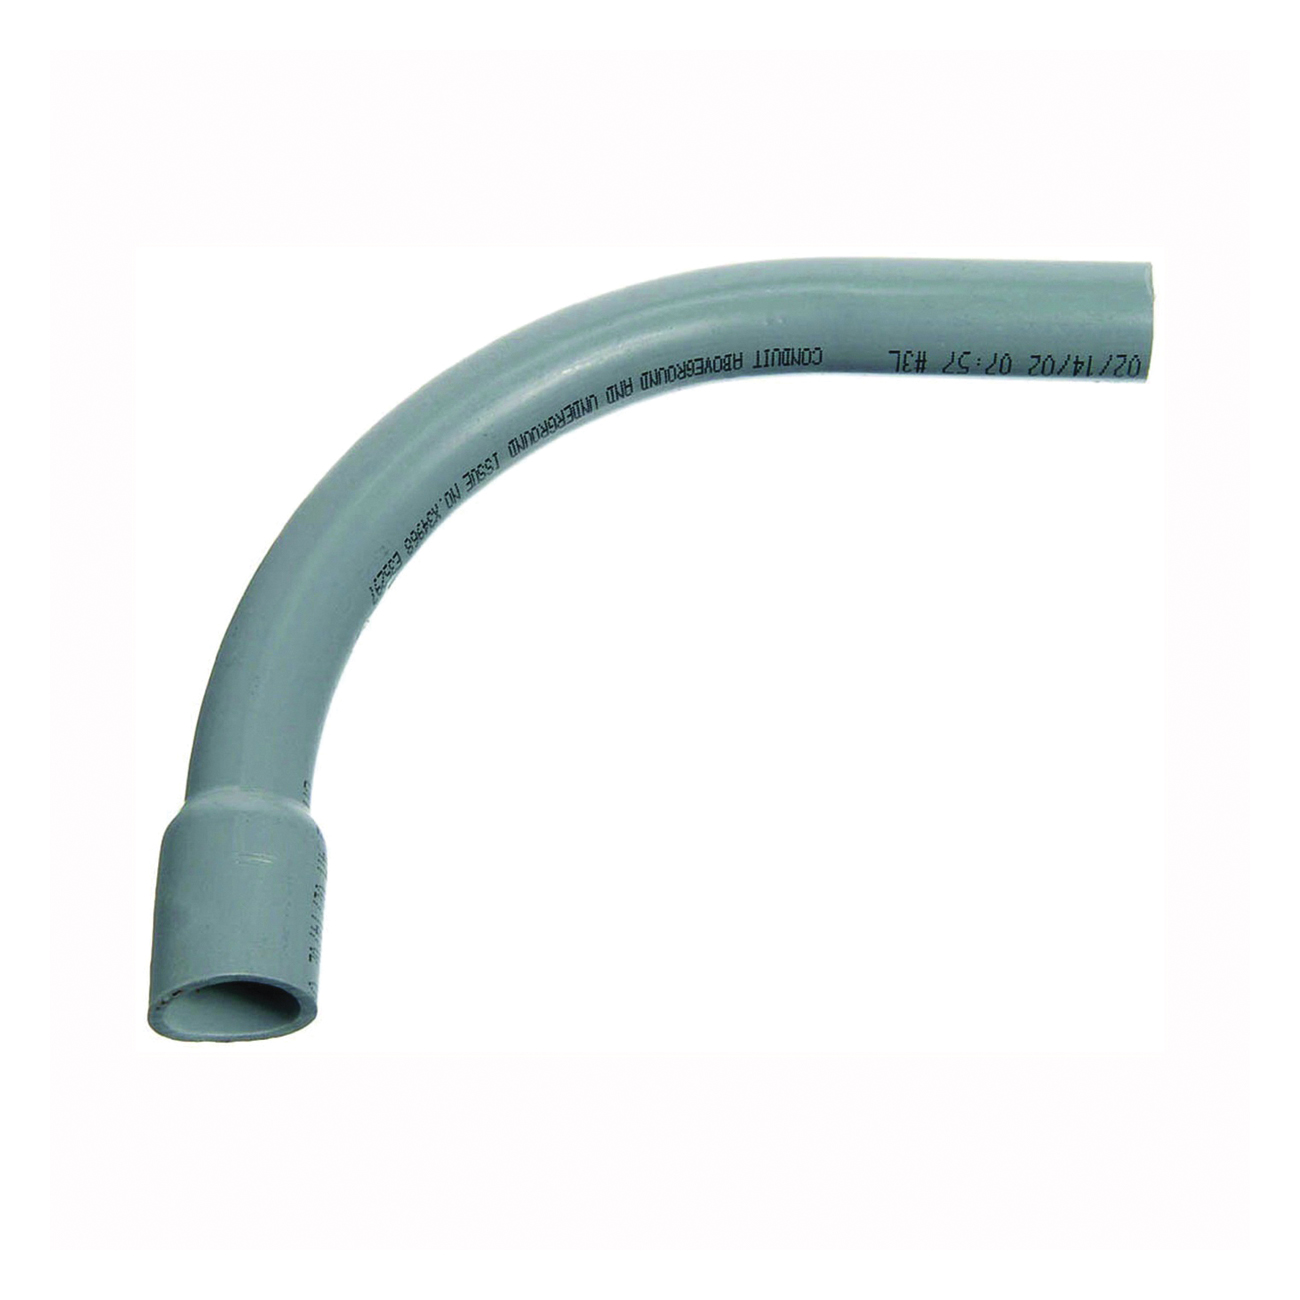 UA9AFB-CTN Elbow, 1 in Trade Size, 90 deg Angle, SCH 40 Schedule Rating, PVC, Bell End, Gray